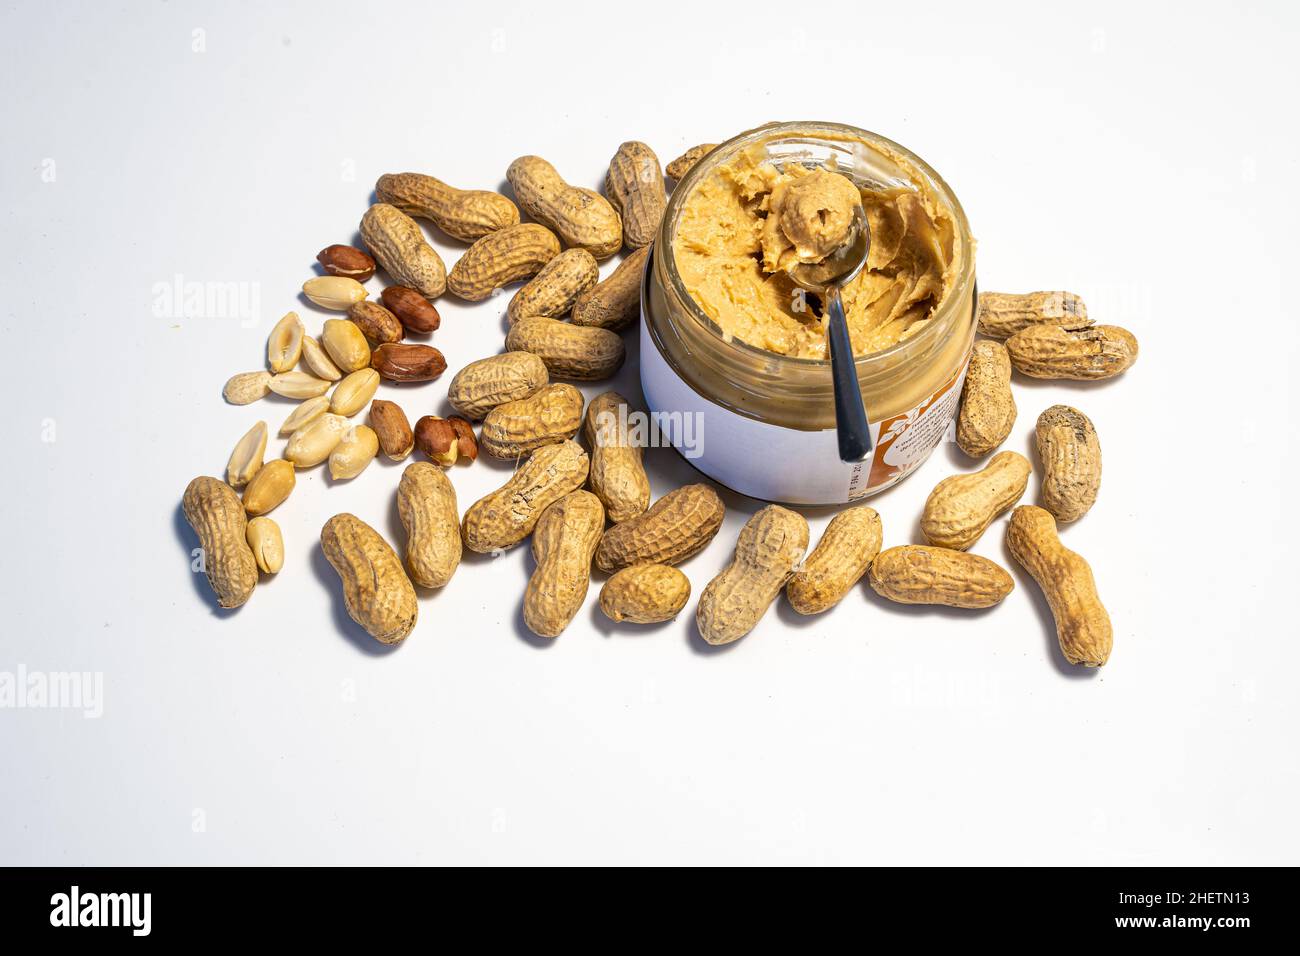 peanut butter in an open glass on a white background, next to scattered peanuts Stock Photo